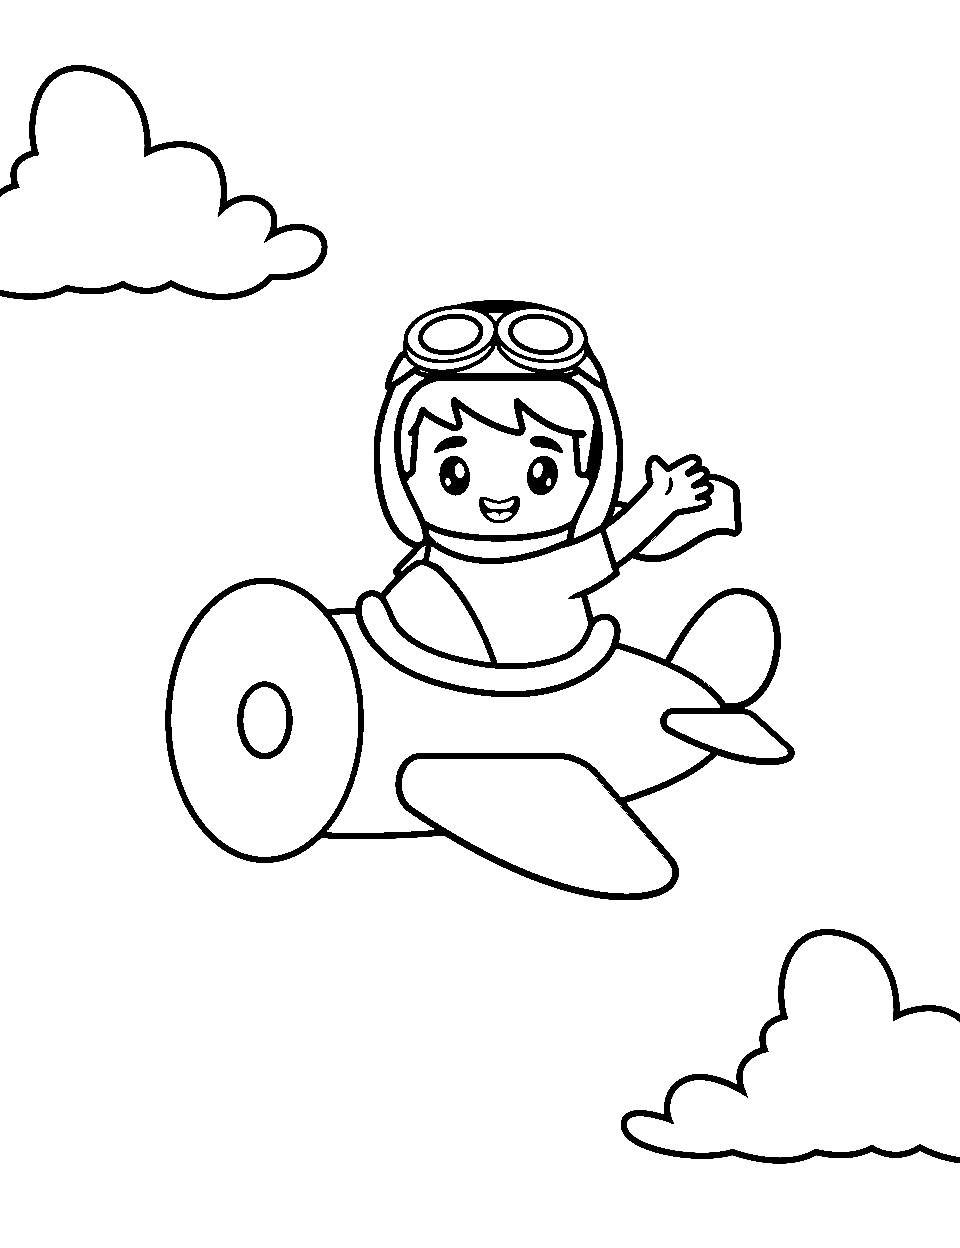 First Solo Flight Airplane Coloring Page - A small, single-engine plane piloted by a young aviator.